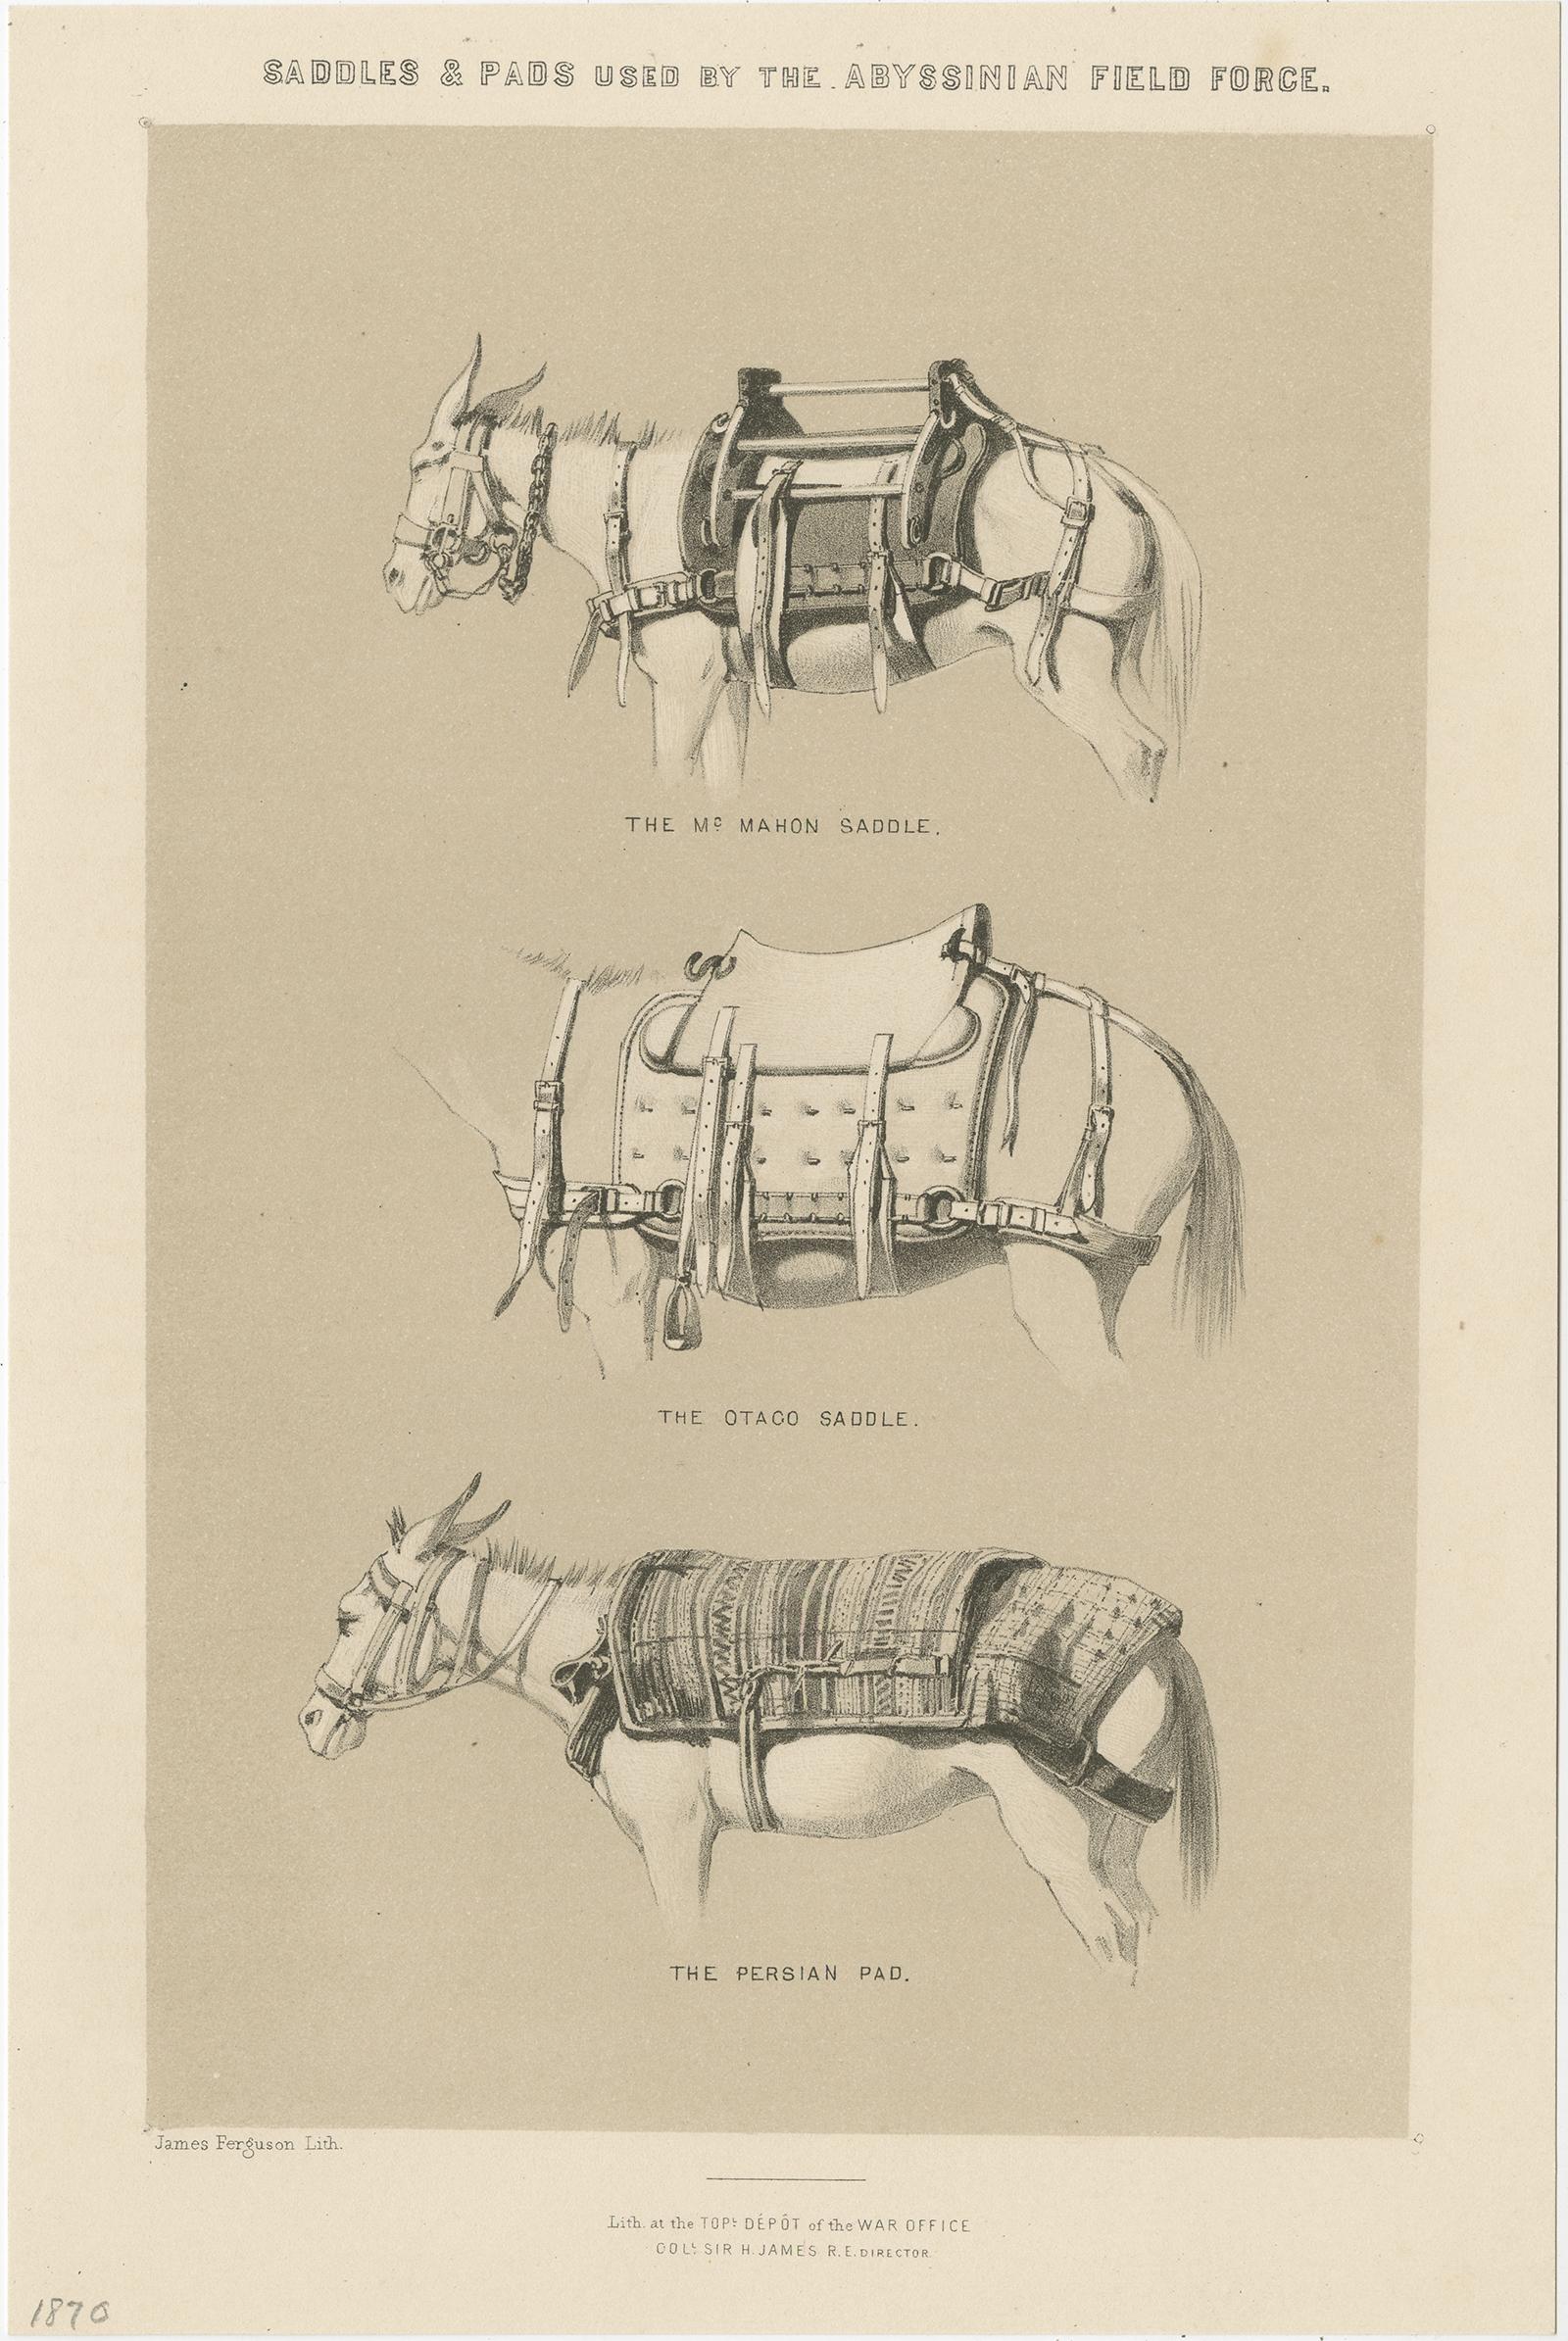 Antique print titled 'Saddles & Pads used by the Abyssinian Field Force'. Set of two lithographs of saddles and pads used by the Abysinnian Field Force. This print originates from 'Record of the Expedition to Abyssinia compiled by order of the